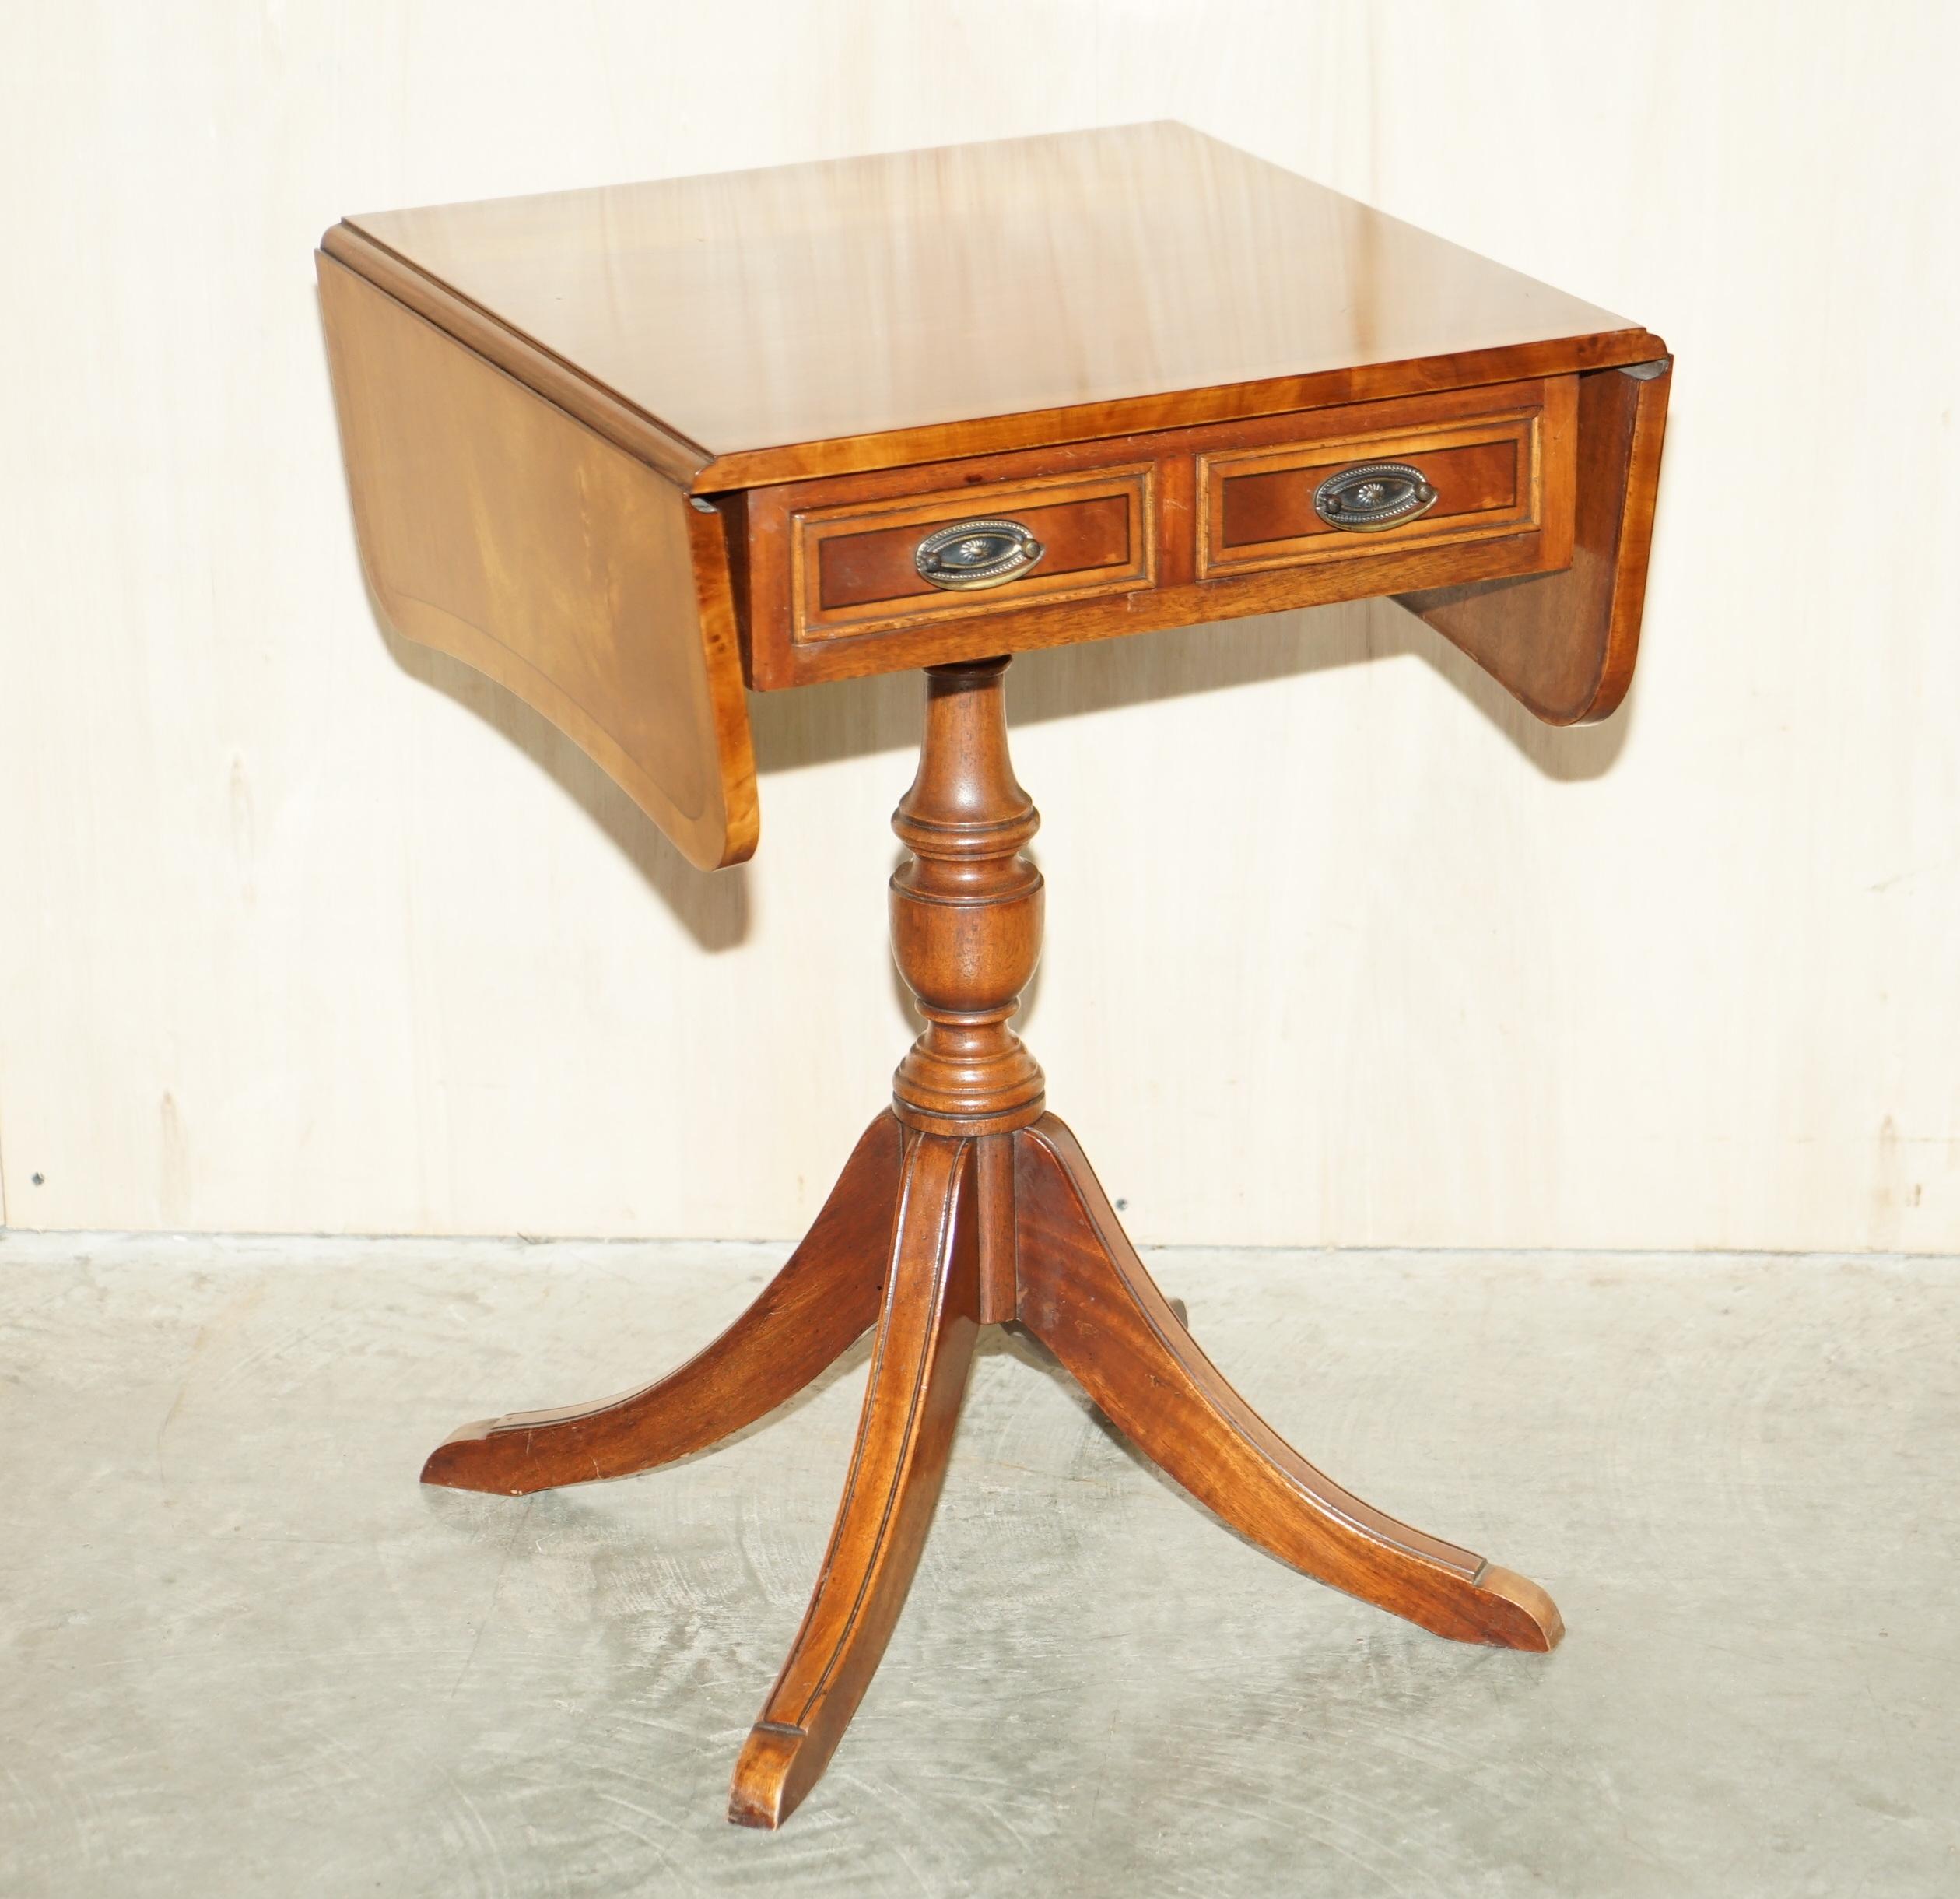 Royal House Antiques

Royal House Antiques is delighted to offer for sale this lovely flamed mahogany Bevan Funnell extending side table with two drawers

Please note the delivery fee listed is just a guide, it covers within the M25 only for the UK